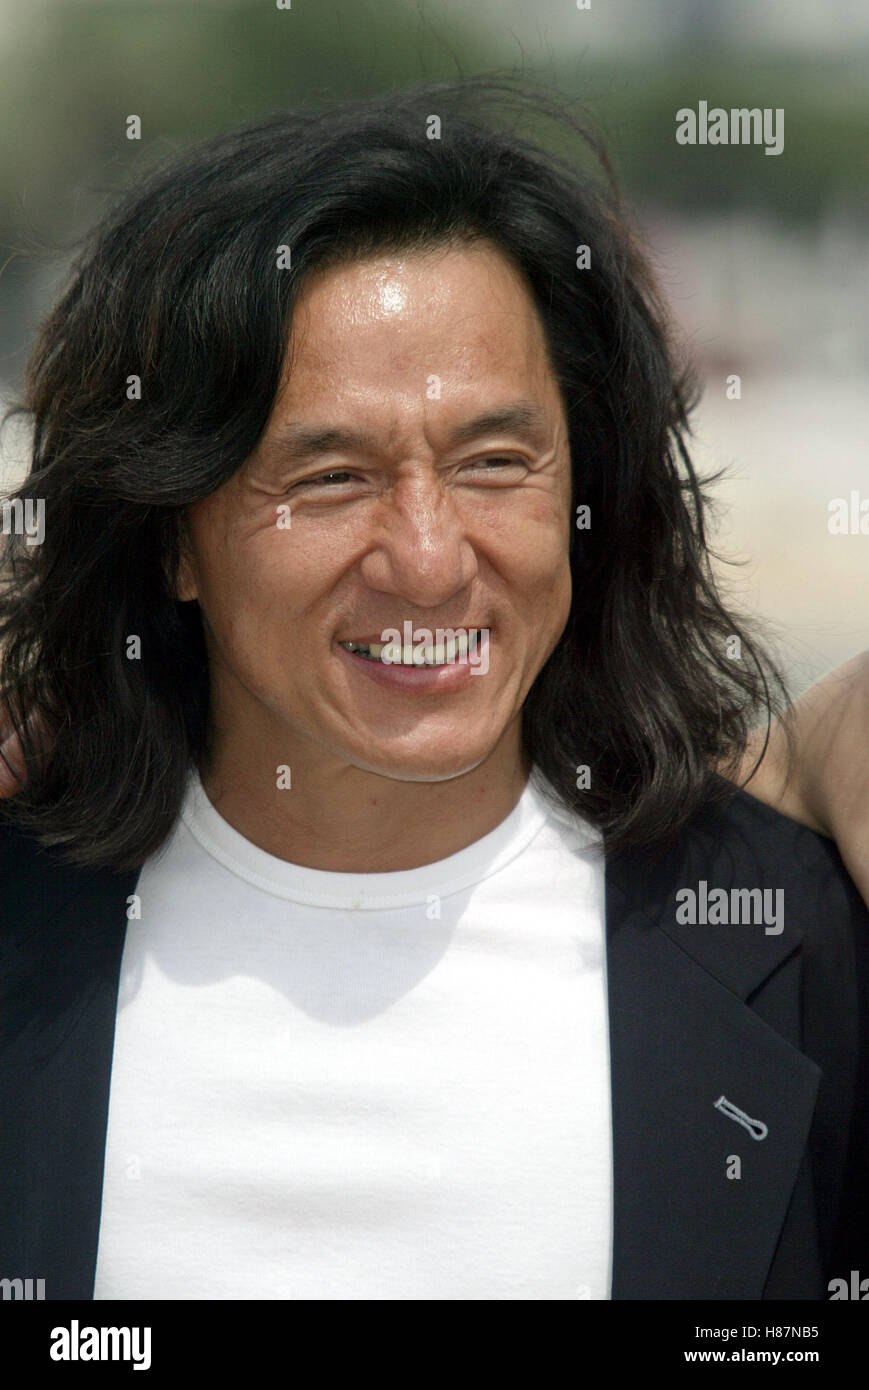 JACKIE CHAN CANNES FILM FESTIVAL CANNES FRANCE 18 May 2003 Stock Photo -  Alamy